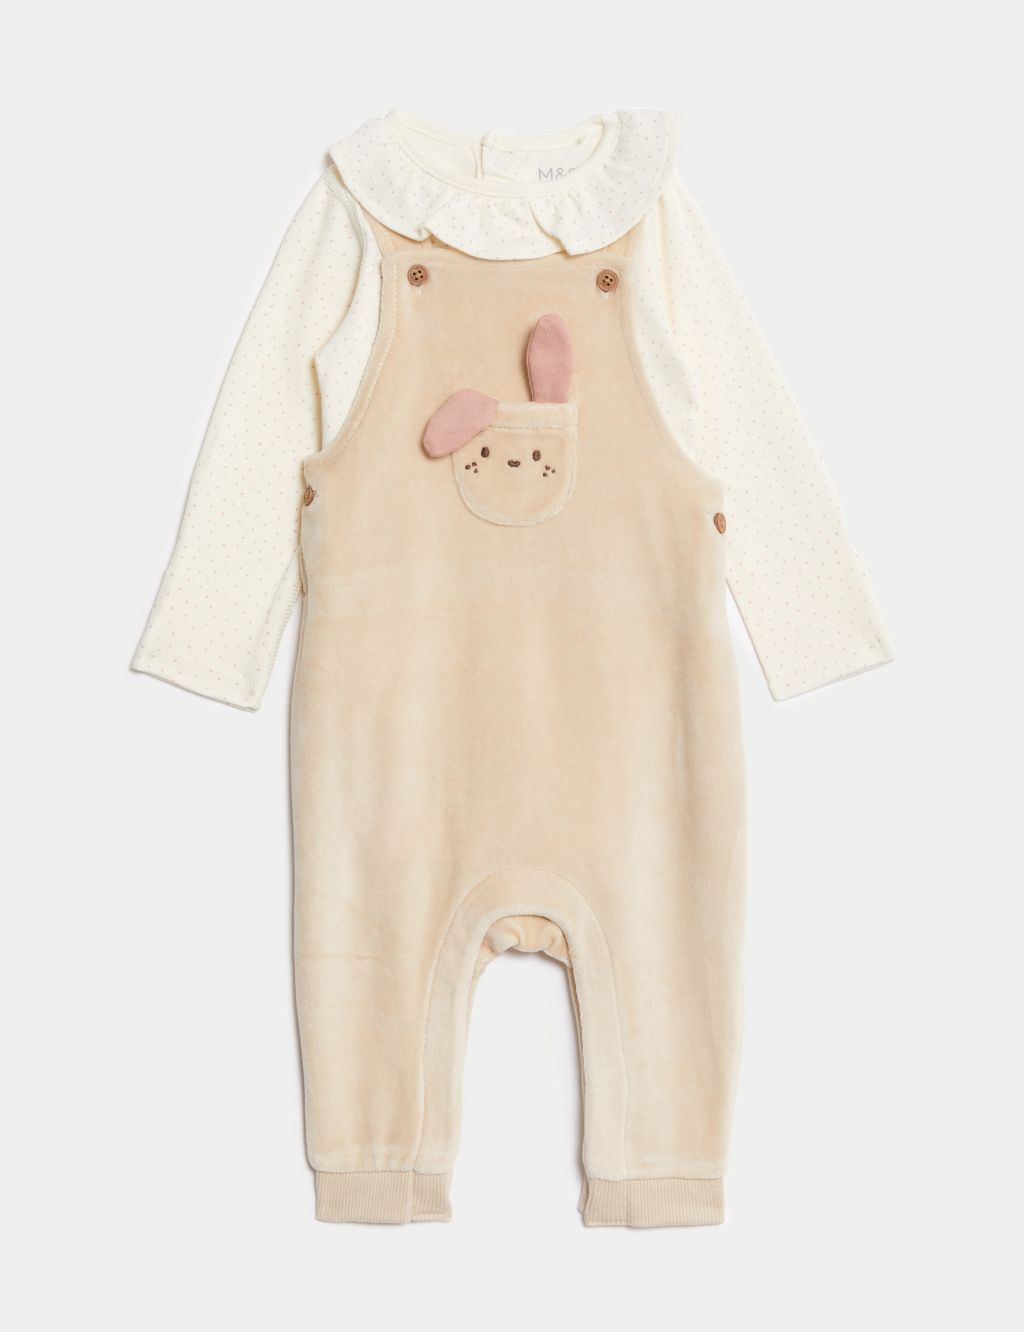 2pc Cotton Rich Bunny Spot Outfit (7lbs-1 Yrs) image 1